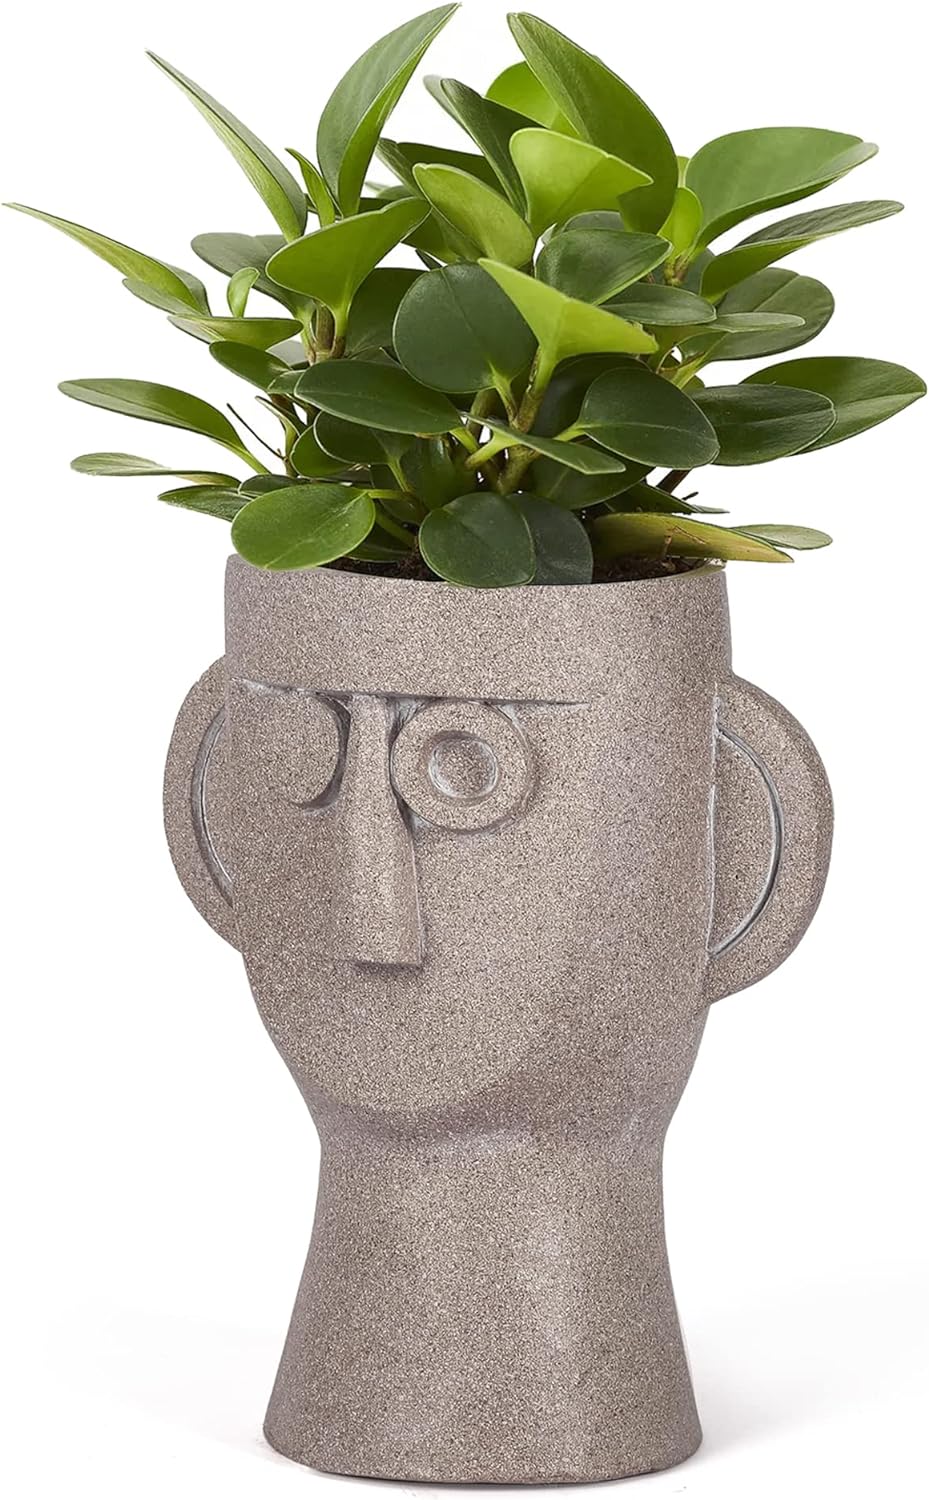 Adeco Easter Island Statue Planter 15 inches Height Face Head Planter Yard Decorations Urn for Plants